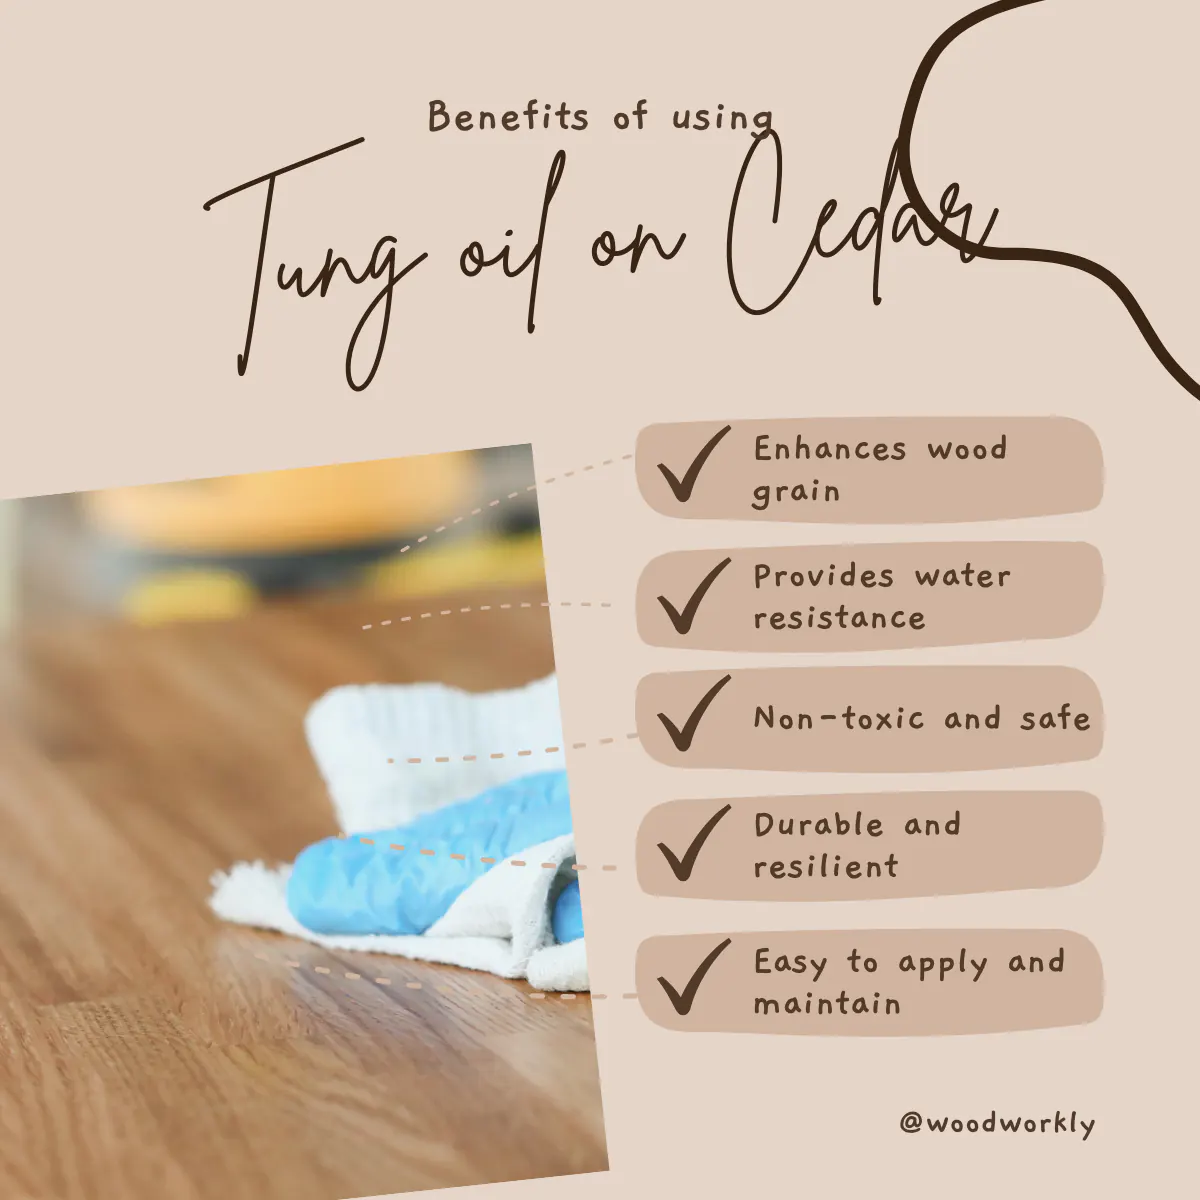 Benefits of tung oil